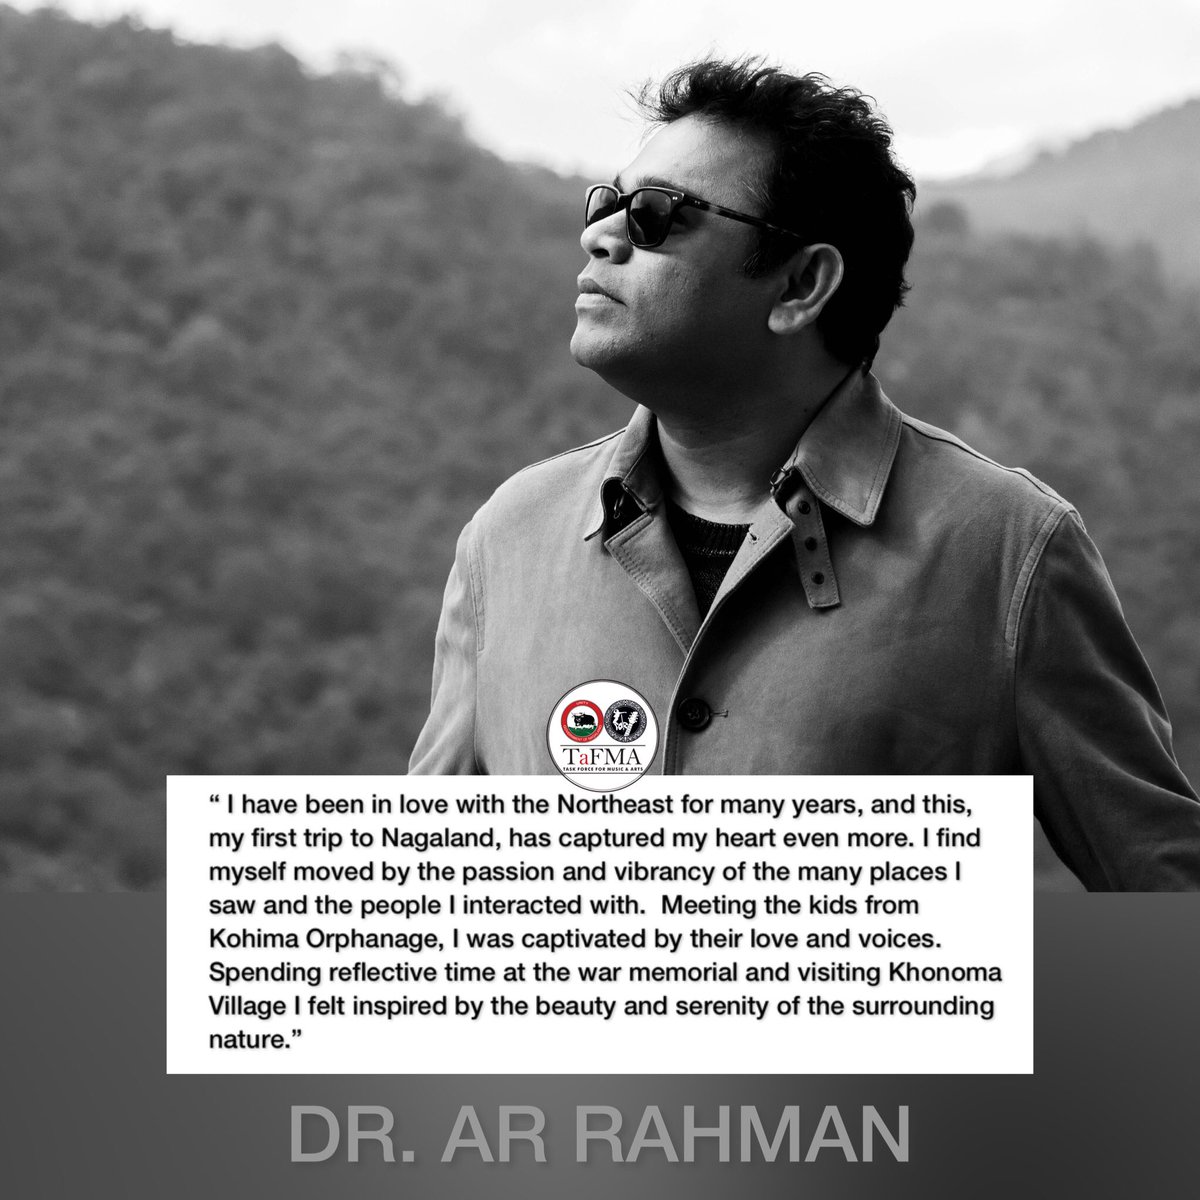 “ I have been in love with the Northeast for many years, and this, my first trip to Nagaland, has captured my heart even more.” - Dr. @arrahman (December 2019)